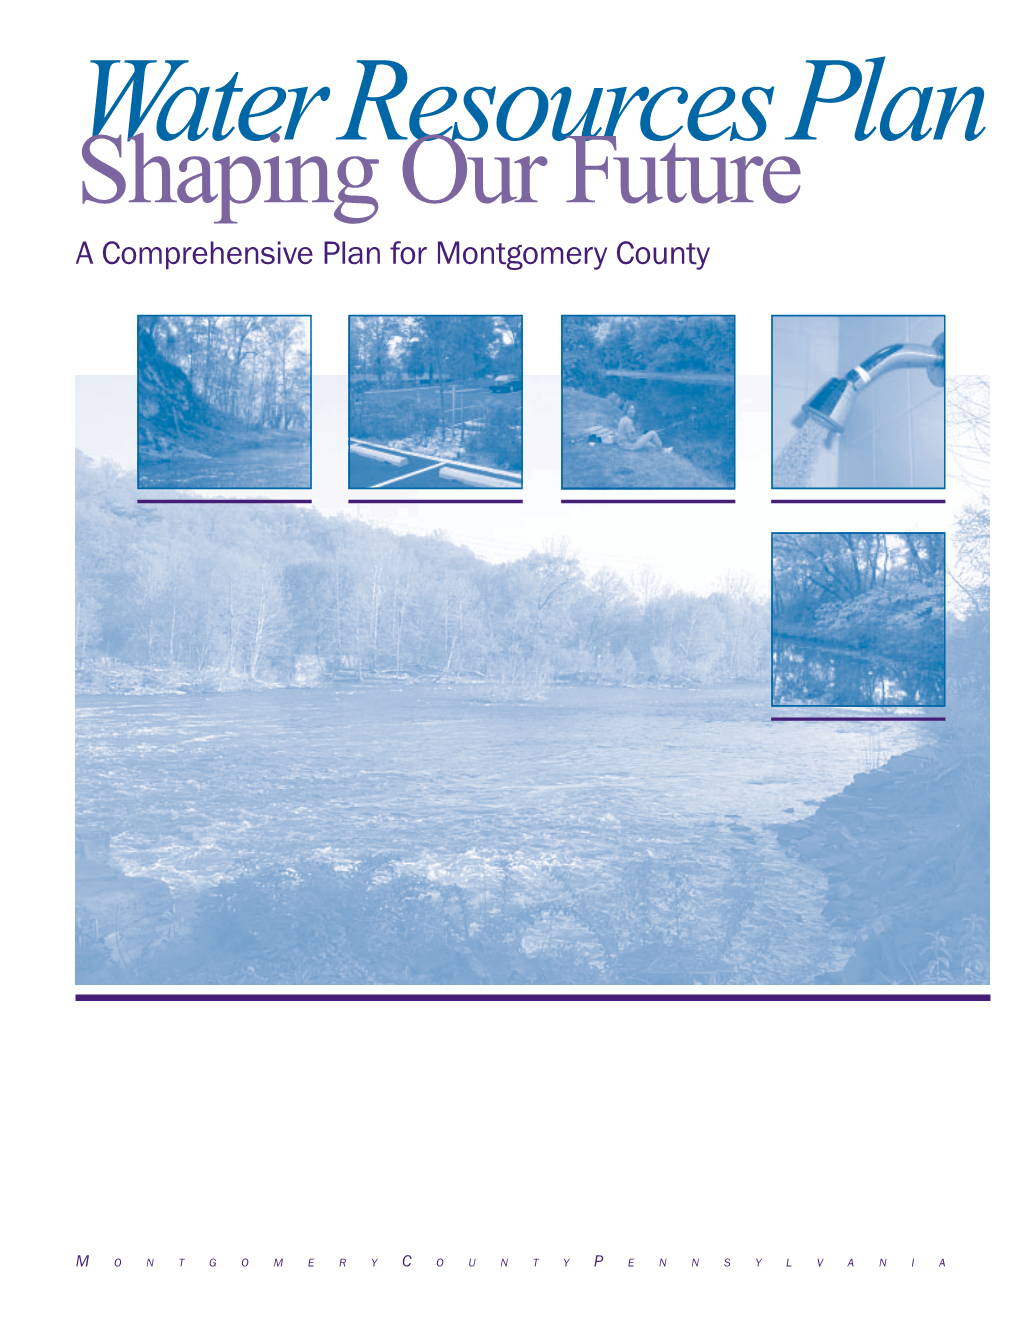 Water Resources Plan Shaping Our Future a Comprehensive Plan for Montgomery County